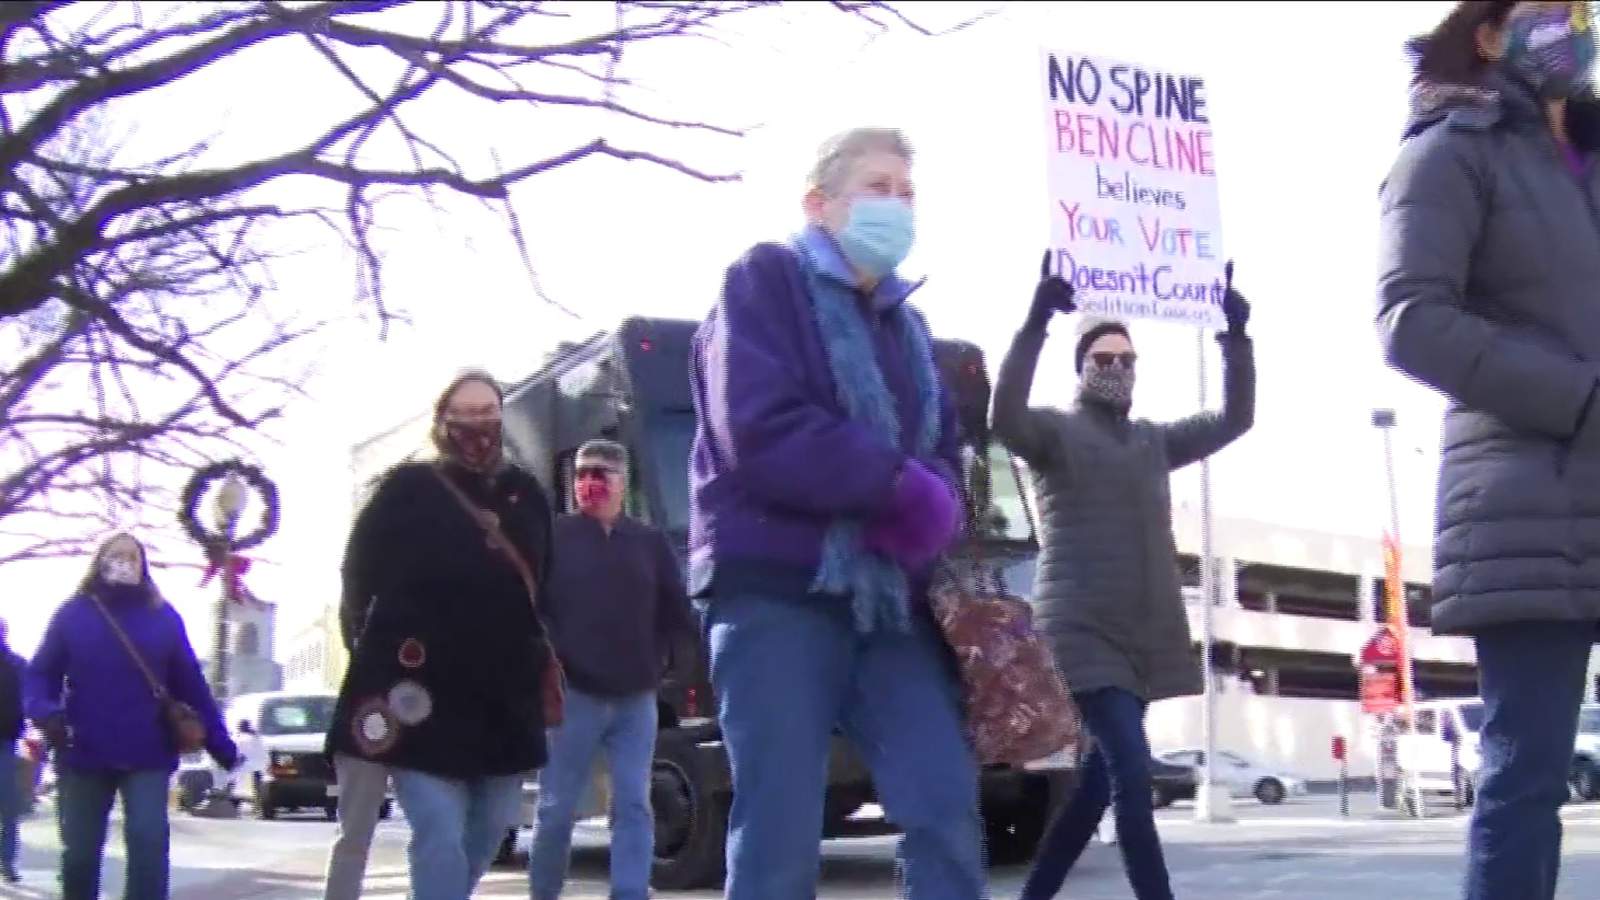 Protesters against Rep. Ben Cline march to his Roanoke office